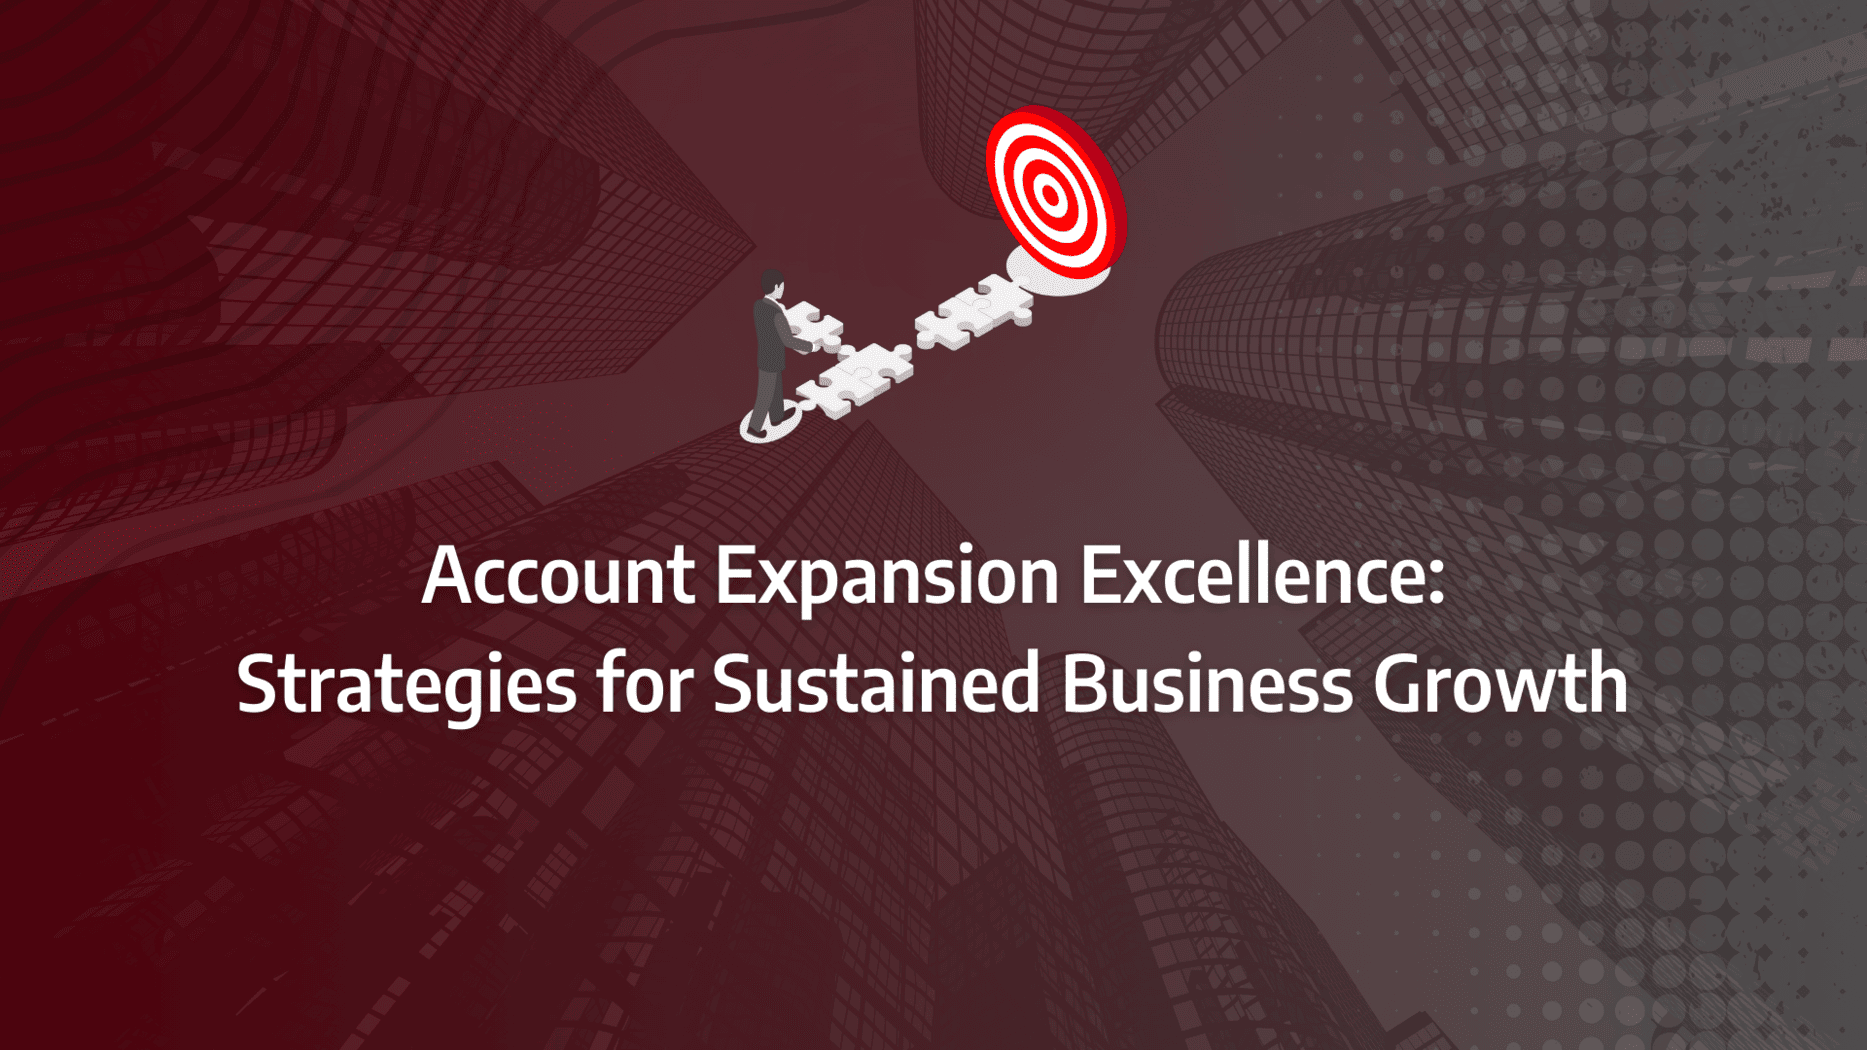 Account expansion: Driving sustained business growth through strategic account expansion strategy, robust customer renewal tactics, targeted marketing revenue approaches, and focused management of existing accounts.: strategy framework diagram for account expansion strategy, customer renewal, marketing revenue, existing accounts